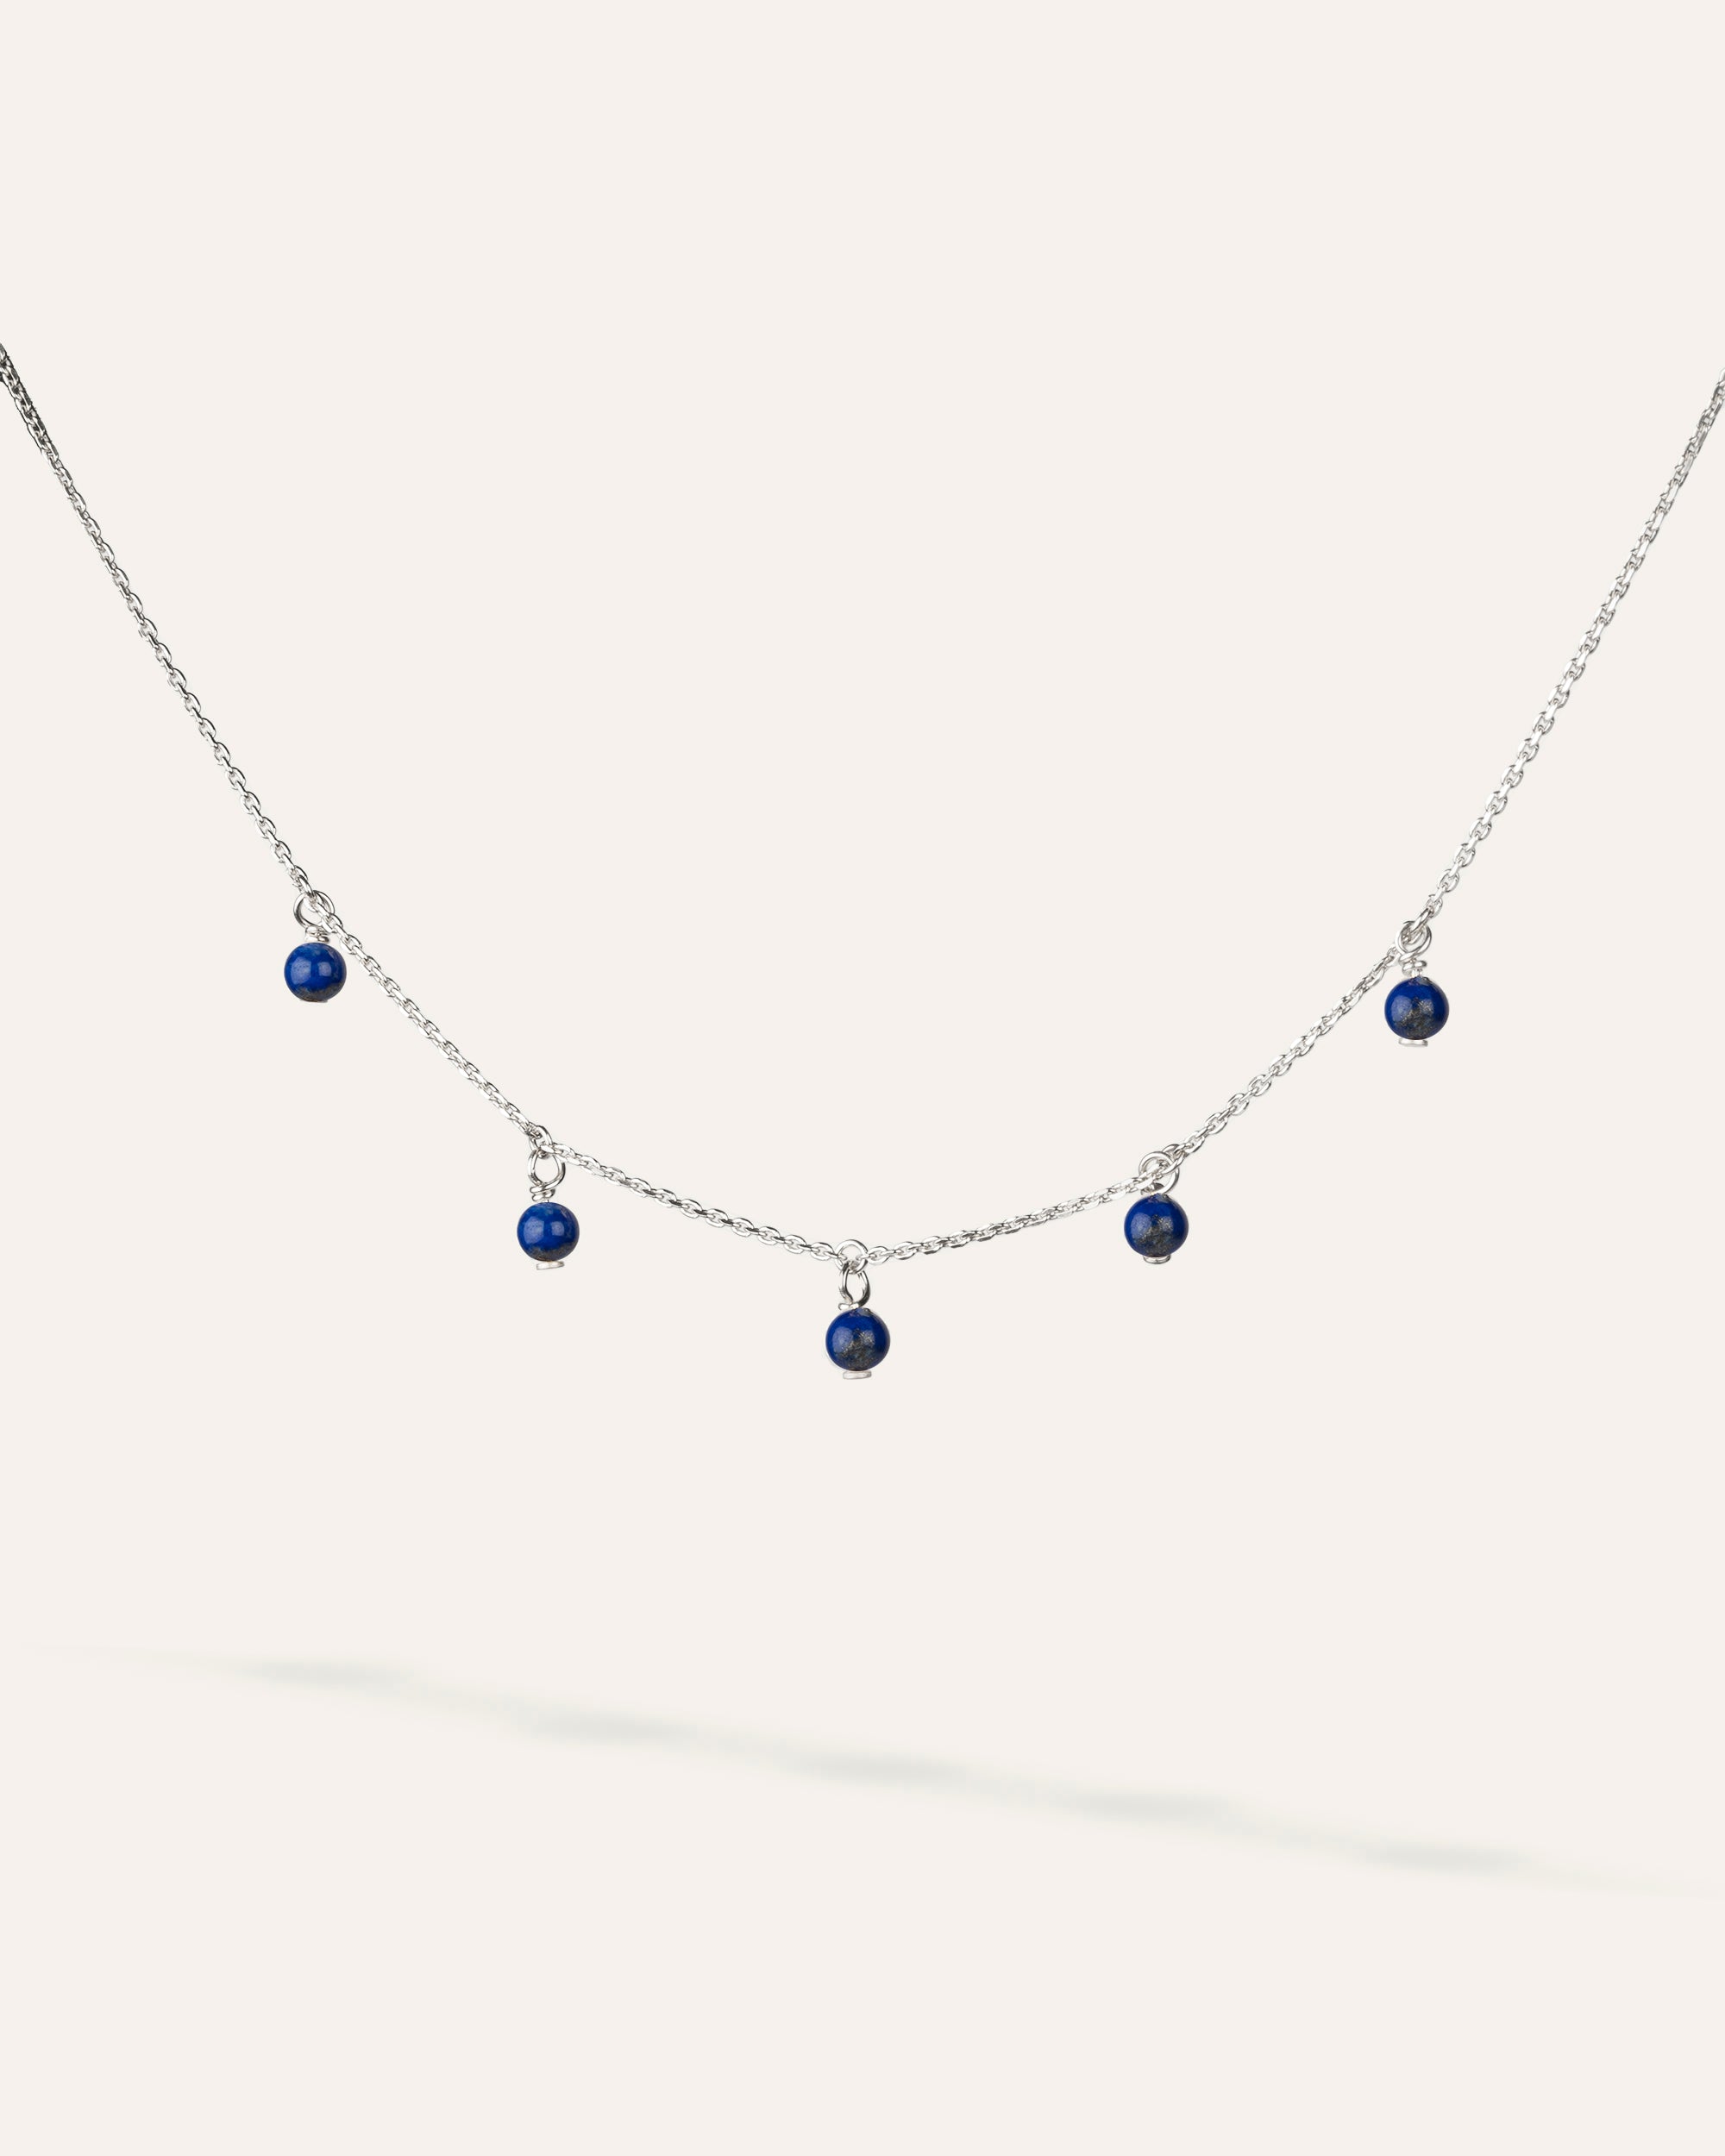 Eternal silver and lapis lazuli necklace